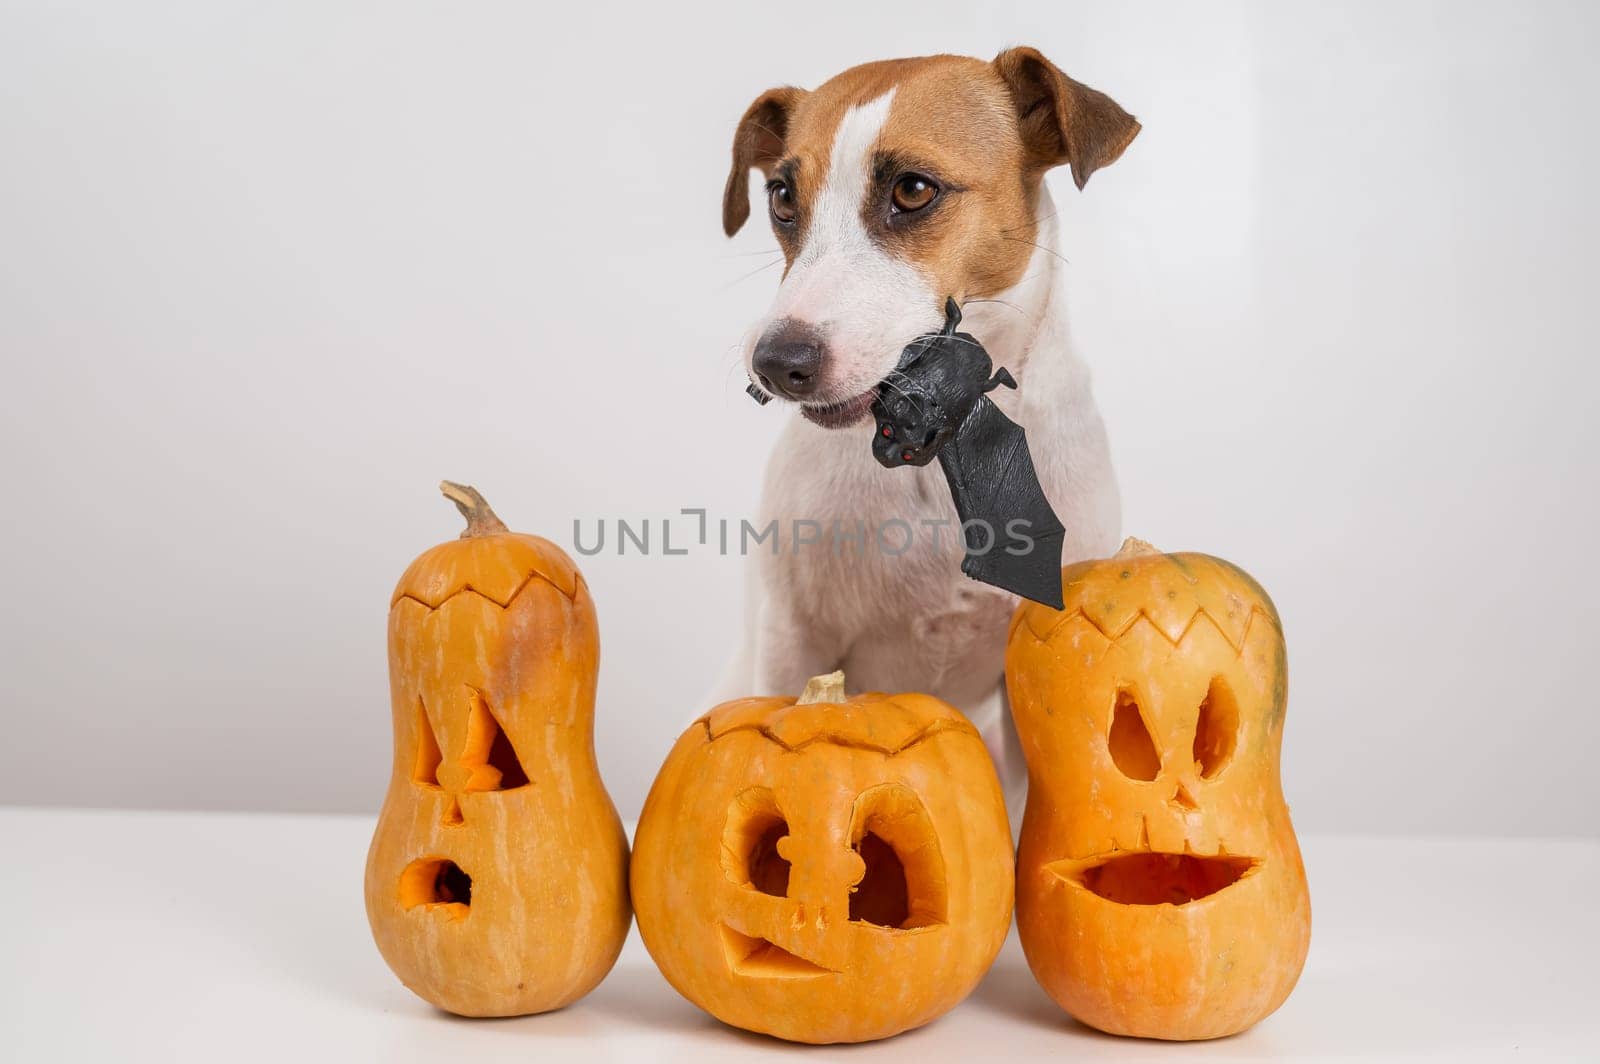 Jack Russell Terrier dog holding a bat next to three jack-o-lanterns on a white background